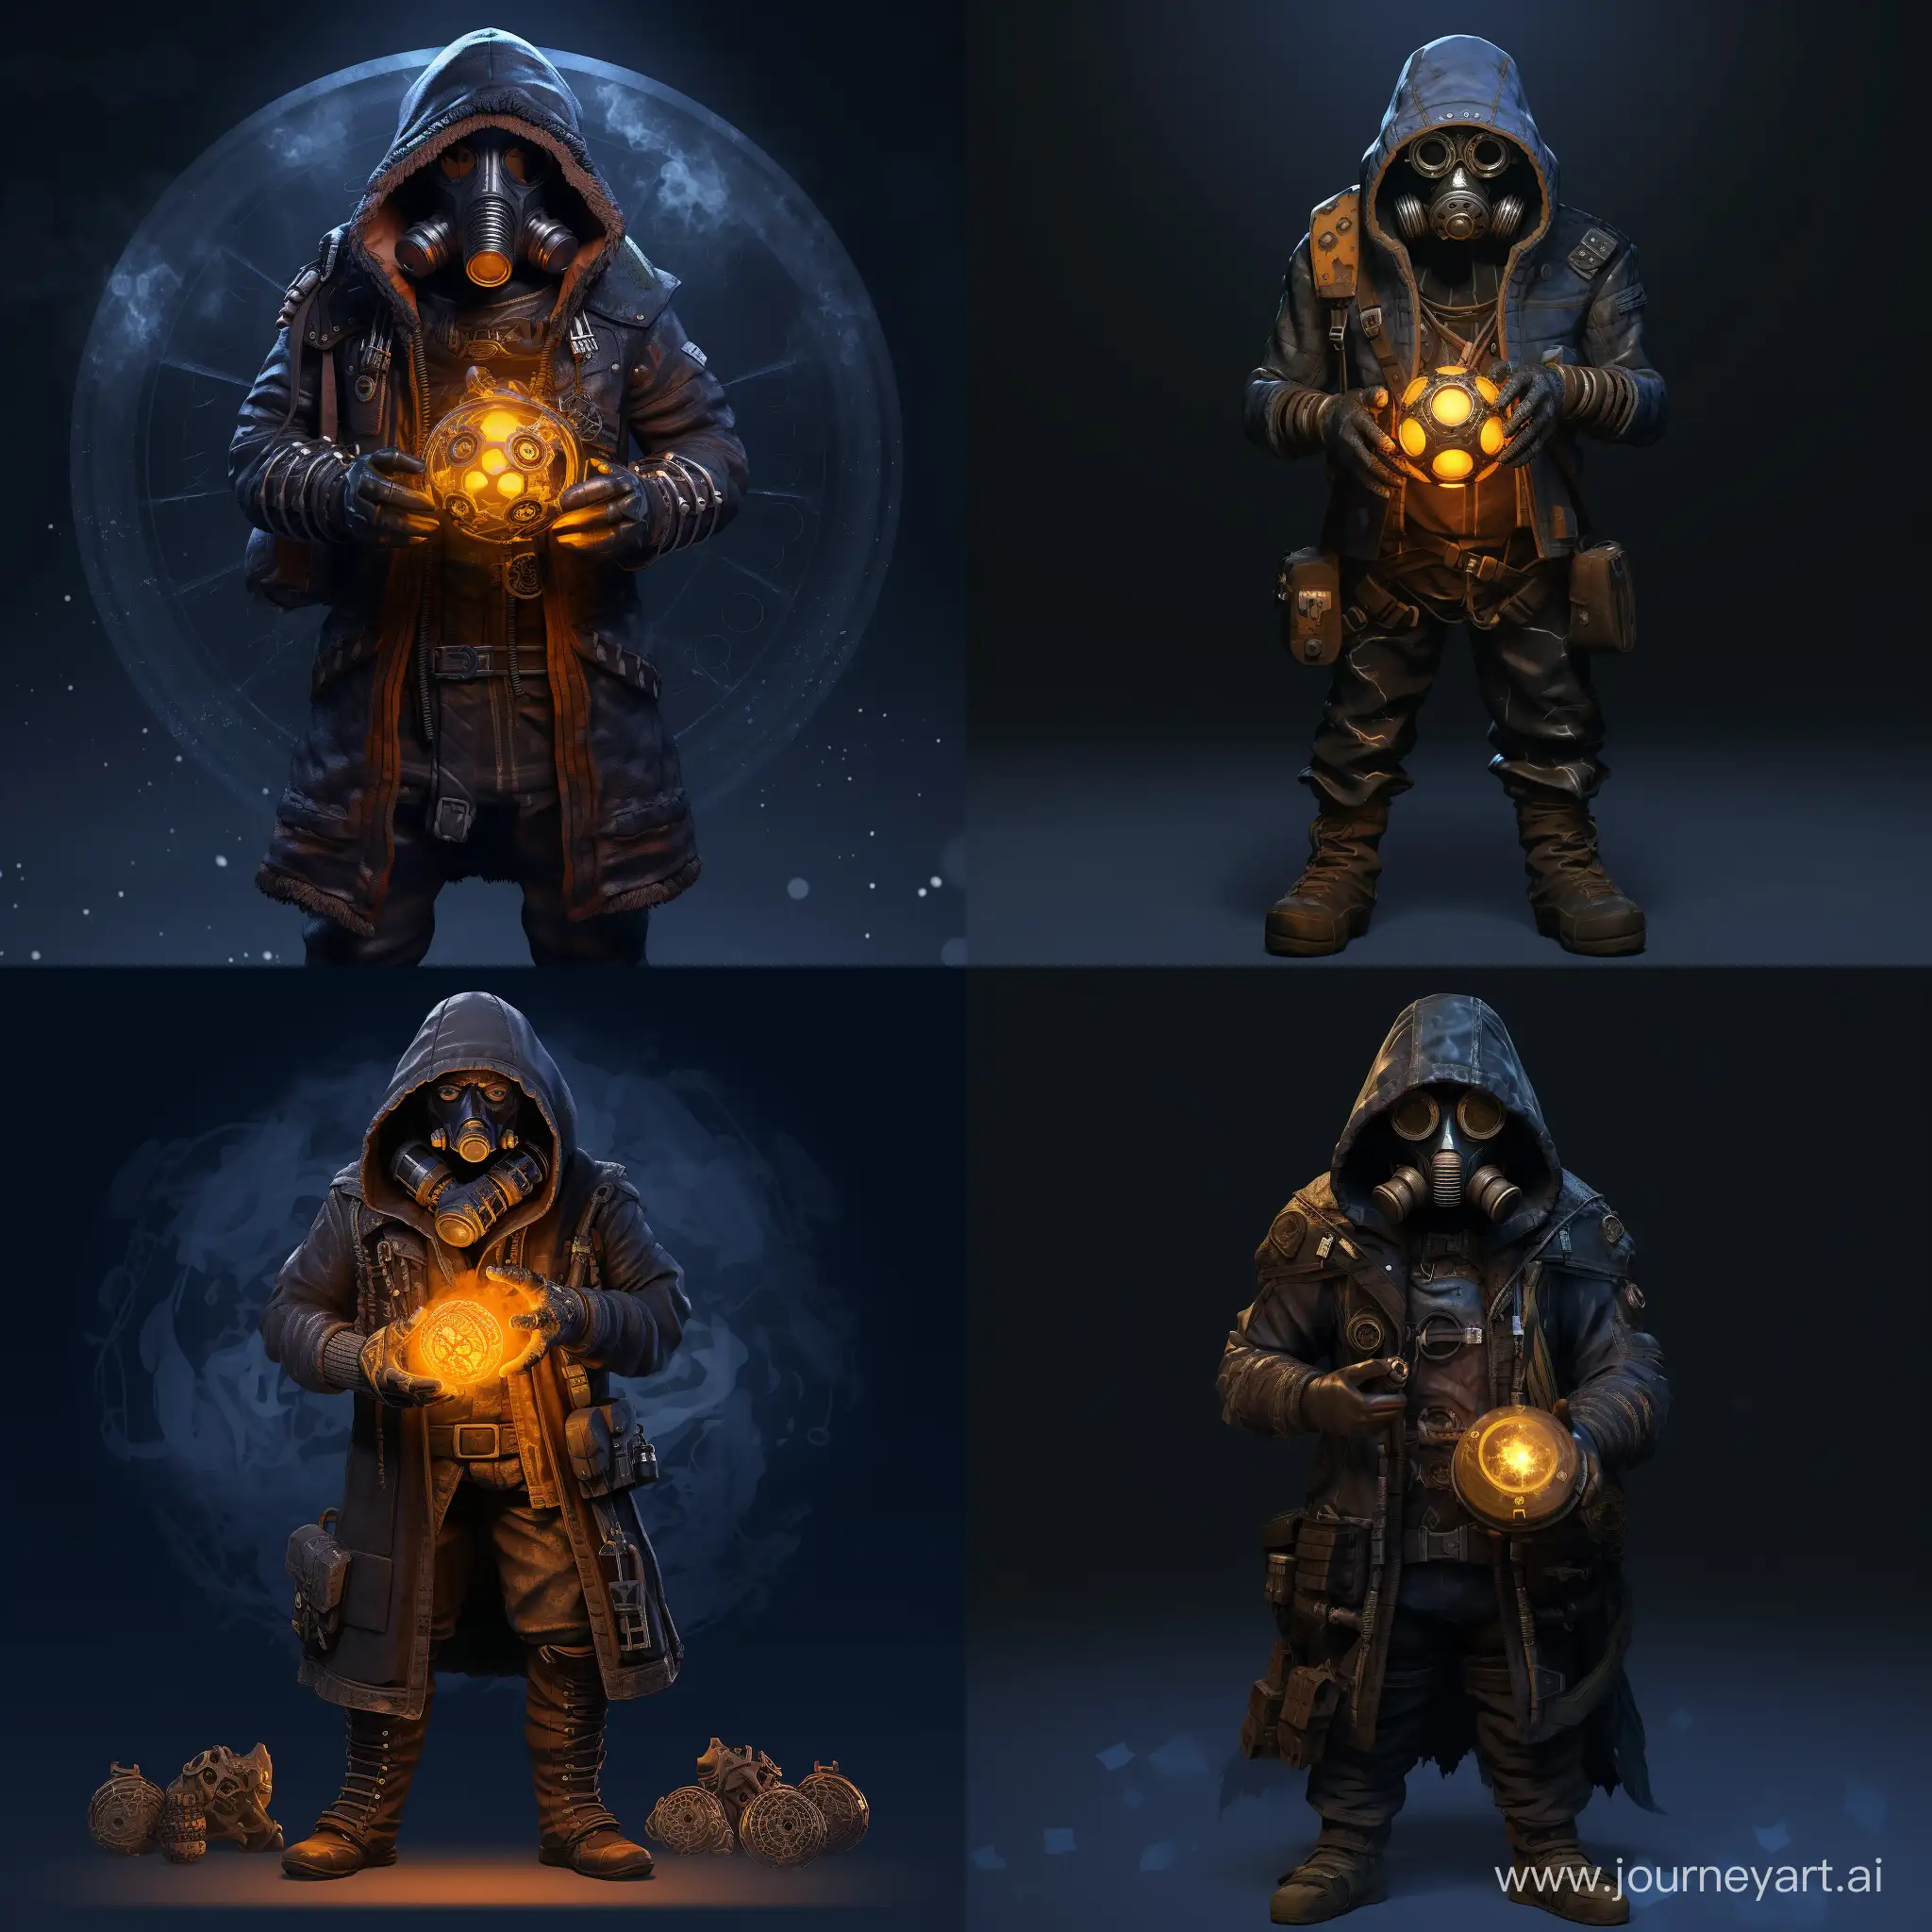 Strong-Build-EngineerScientist-in-Gas-Mask-Holding-Illuminated-Sphere